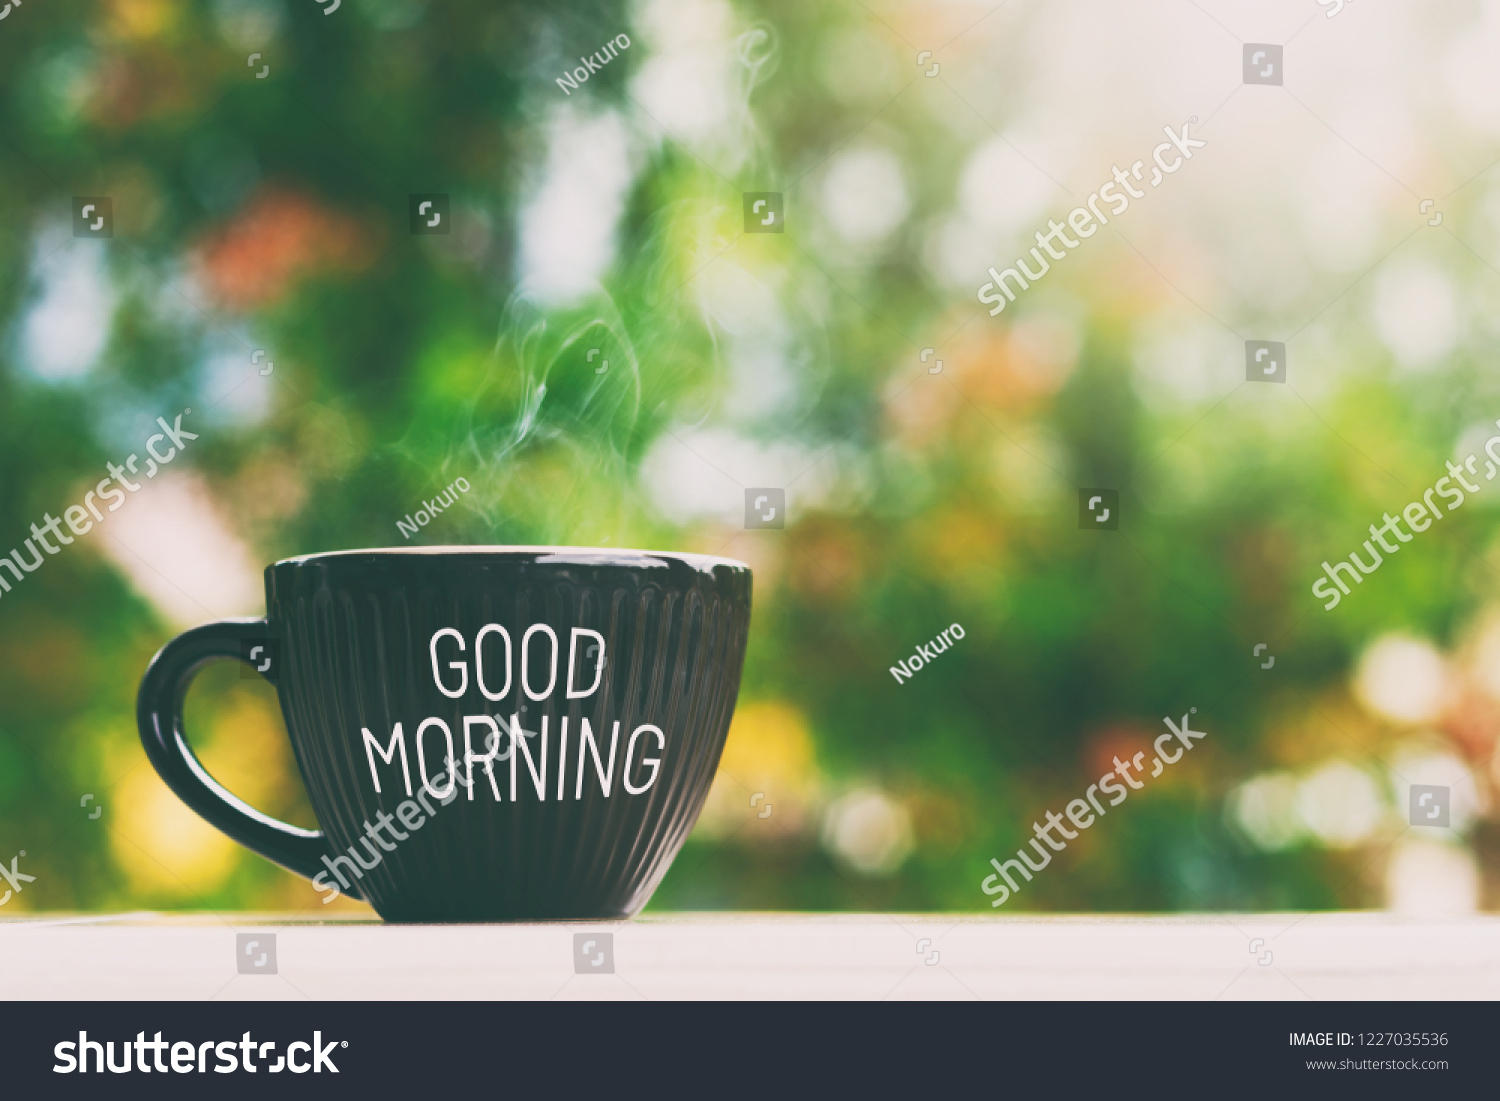 Cup of drink with text "Good Morning" greeting.  #1227035536